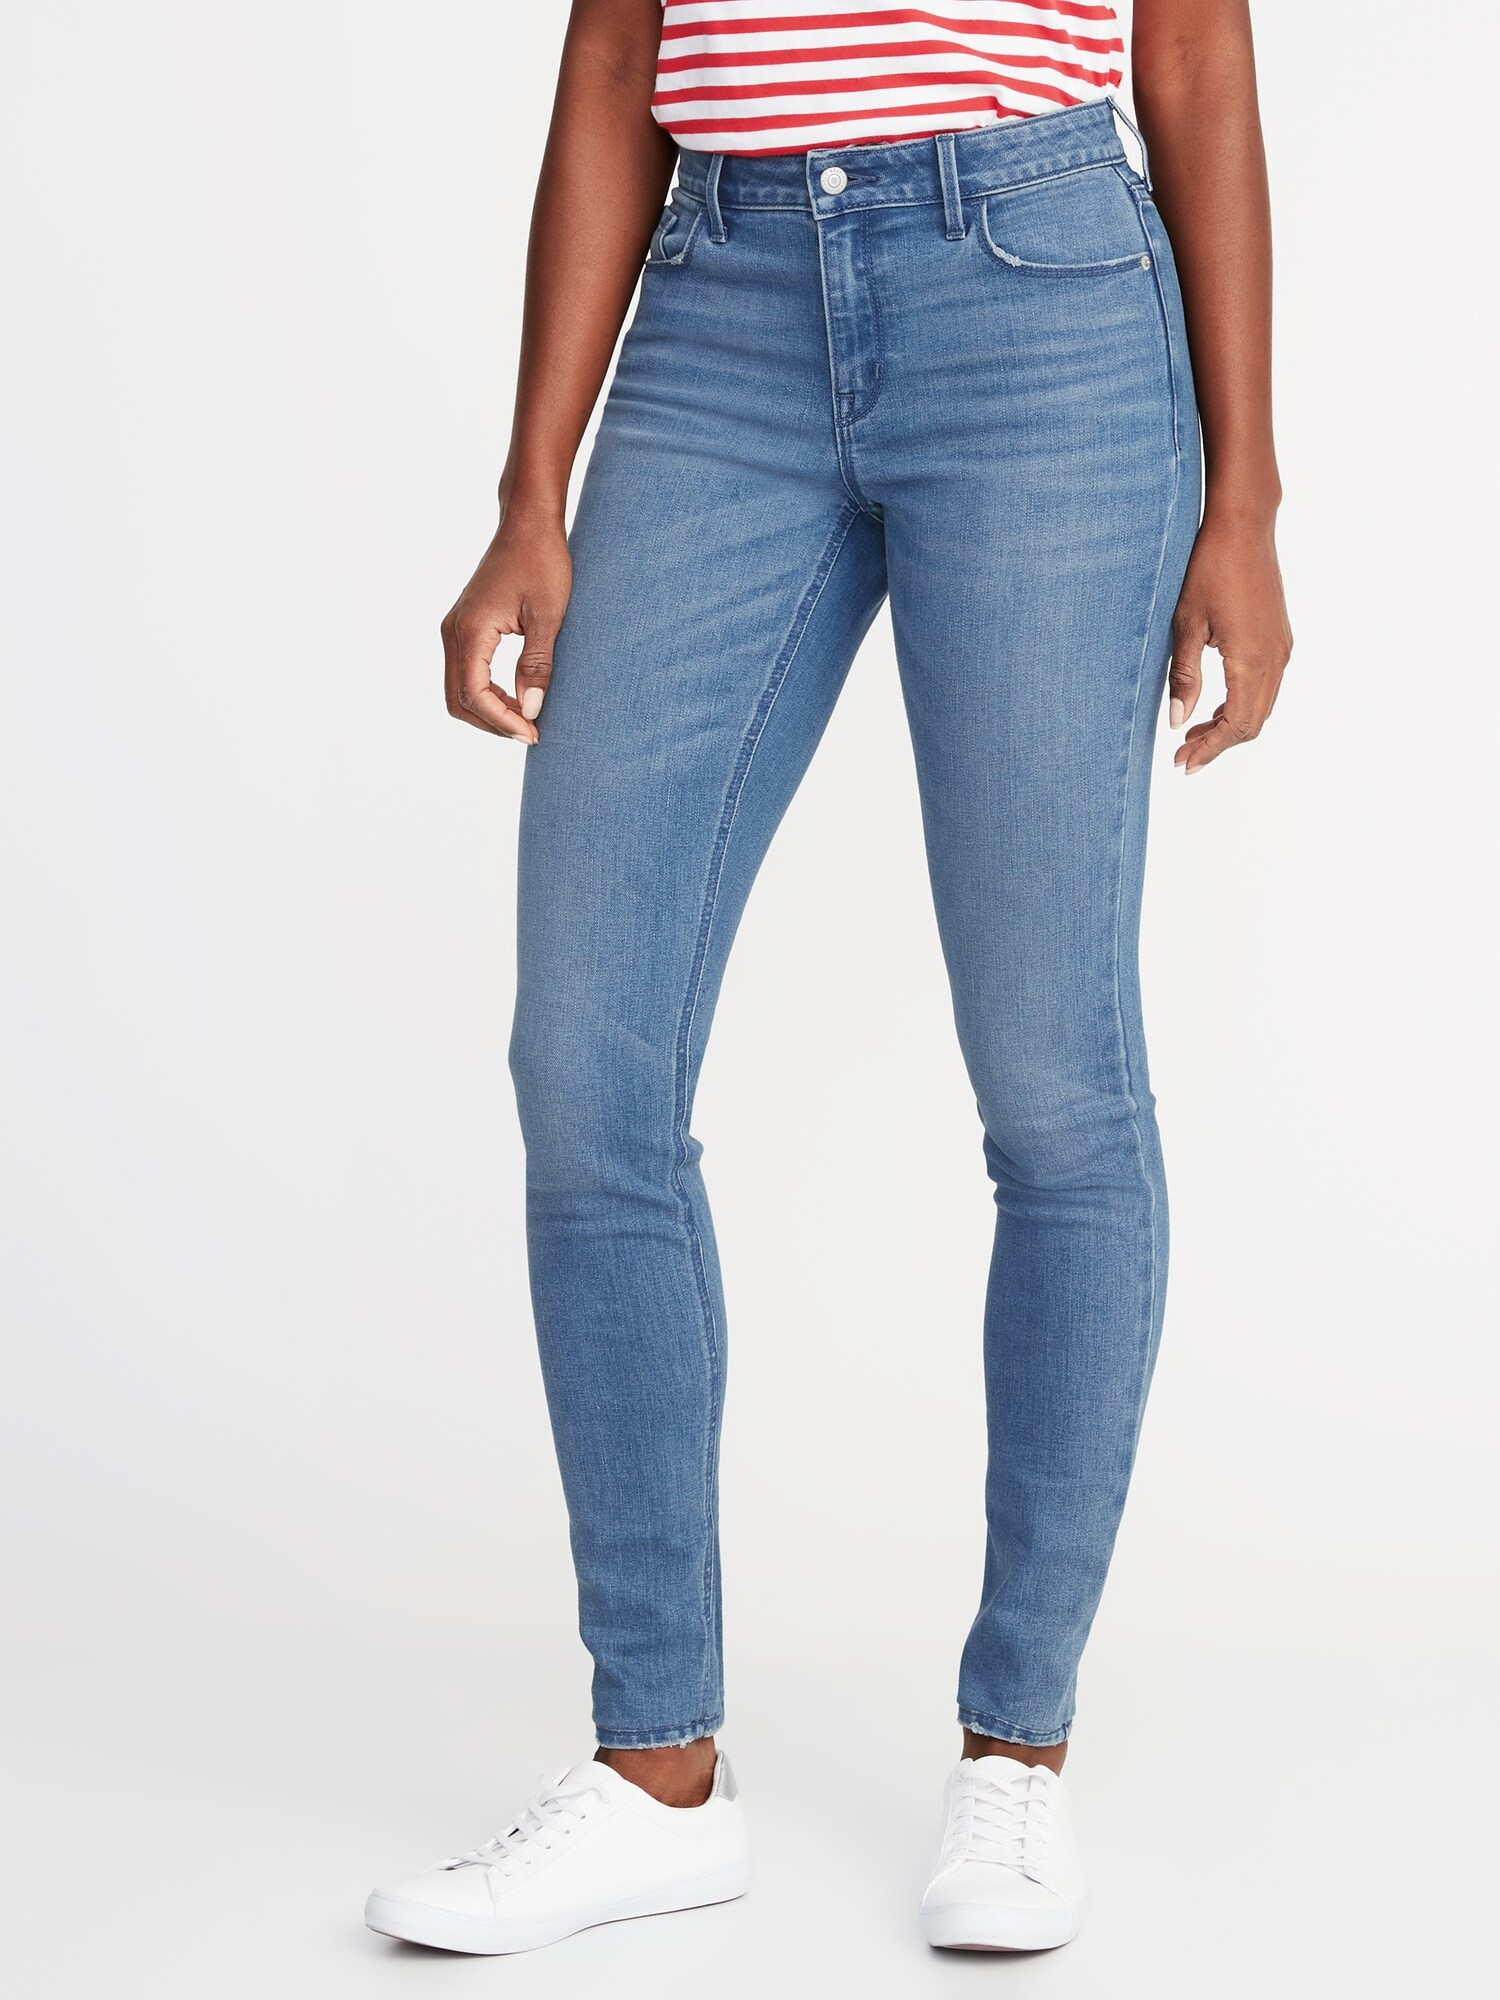 Mid-Rise Skinny Jeans for Women | Old Navy